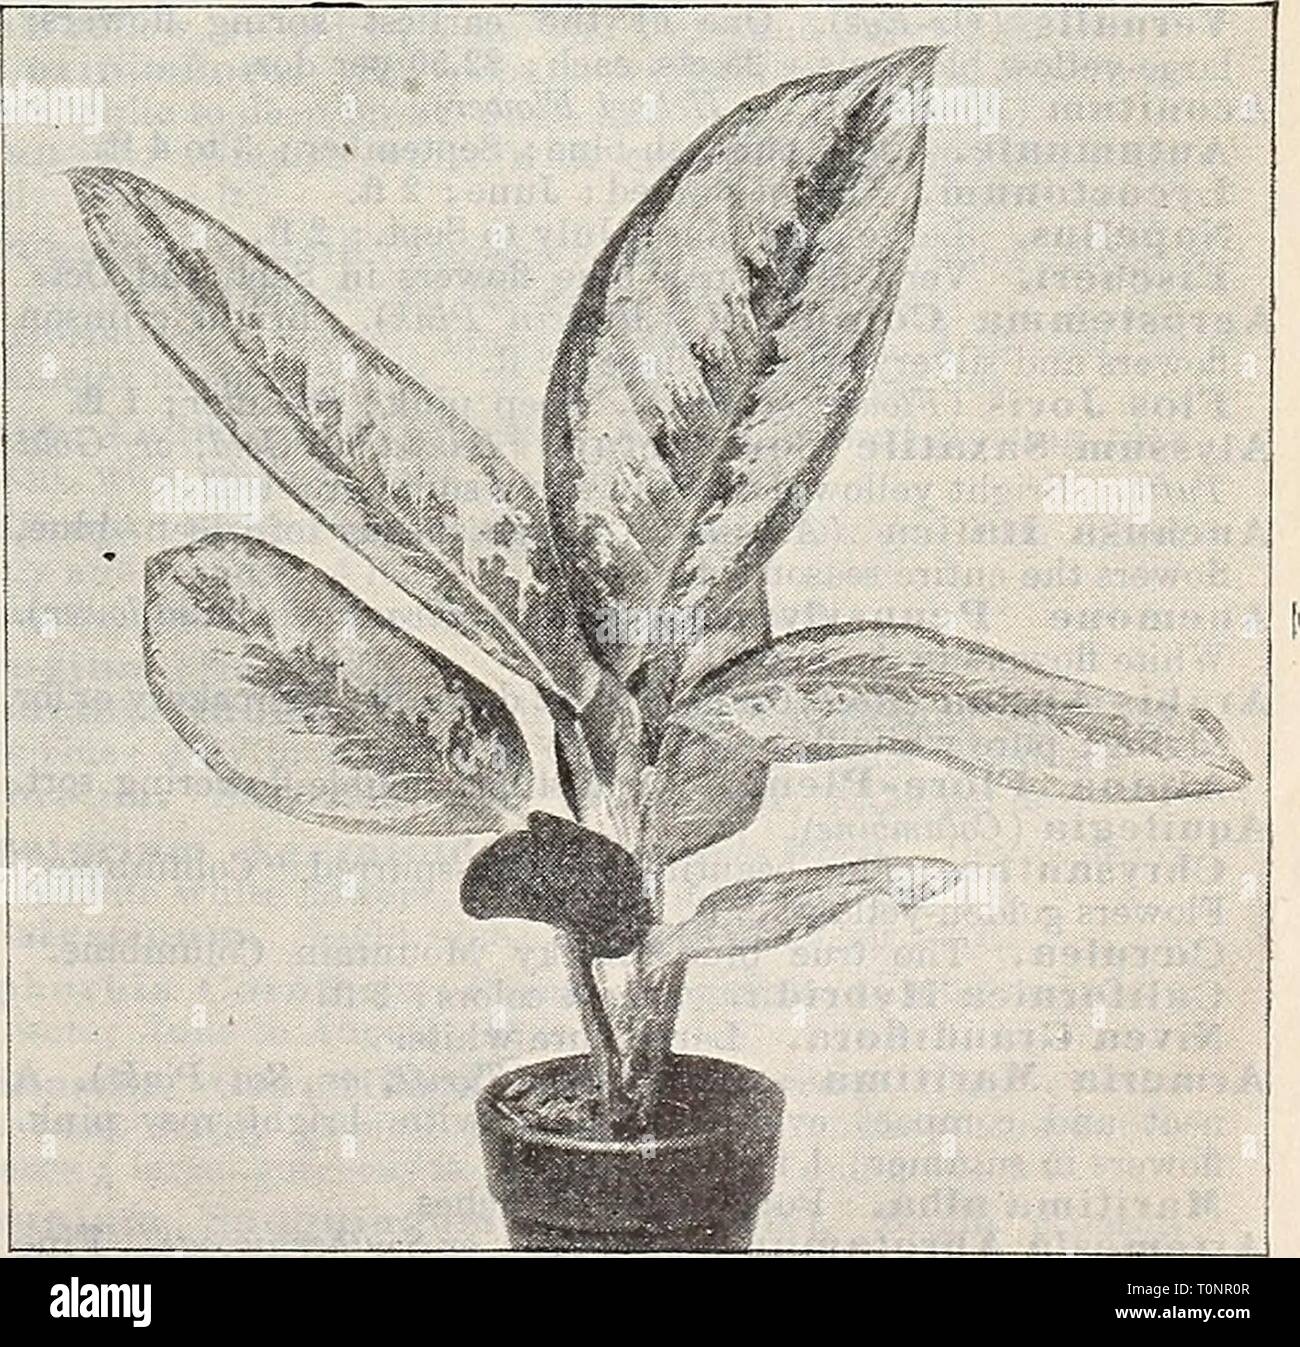 Dreer's autumn catalogue 1906 (1906) Dreer's autumn catalogue 1906  dreersautumncata1906henr Year: 1906  Chinese Fkinged Primrose. PHII^ODCNDRON. 3pectablllS. An interesting stove plant with large heart- shaped dark green leaves, with light veins. 52.50 each. PertUSUm. A stove plant of climbing habit, with large perforated leaves of grotesque appearance. $1.50 each. PHYLI^OT^NIUM. Lindeni. A handsome stove plant with attractive light green hastate leaves, the broad rib and veins creamy-white. 75 cts. each. Lindeni Magnificum. A variety of the above with much larger leaves, and with the variega Stock Photo